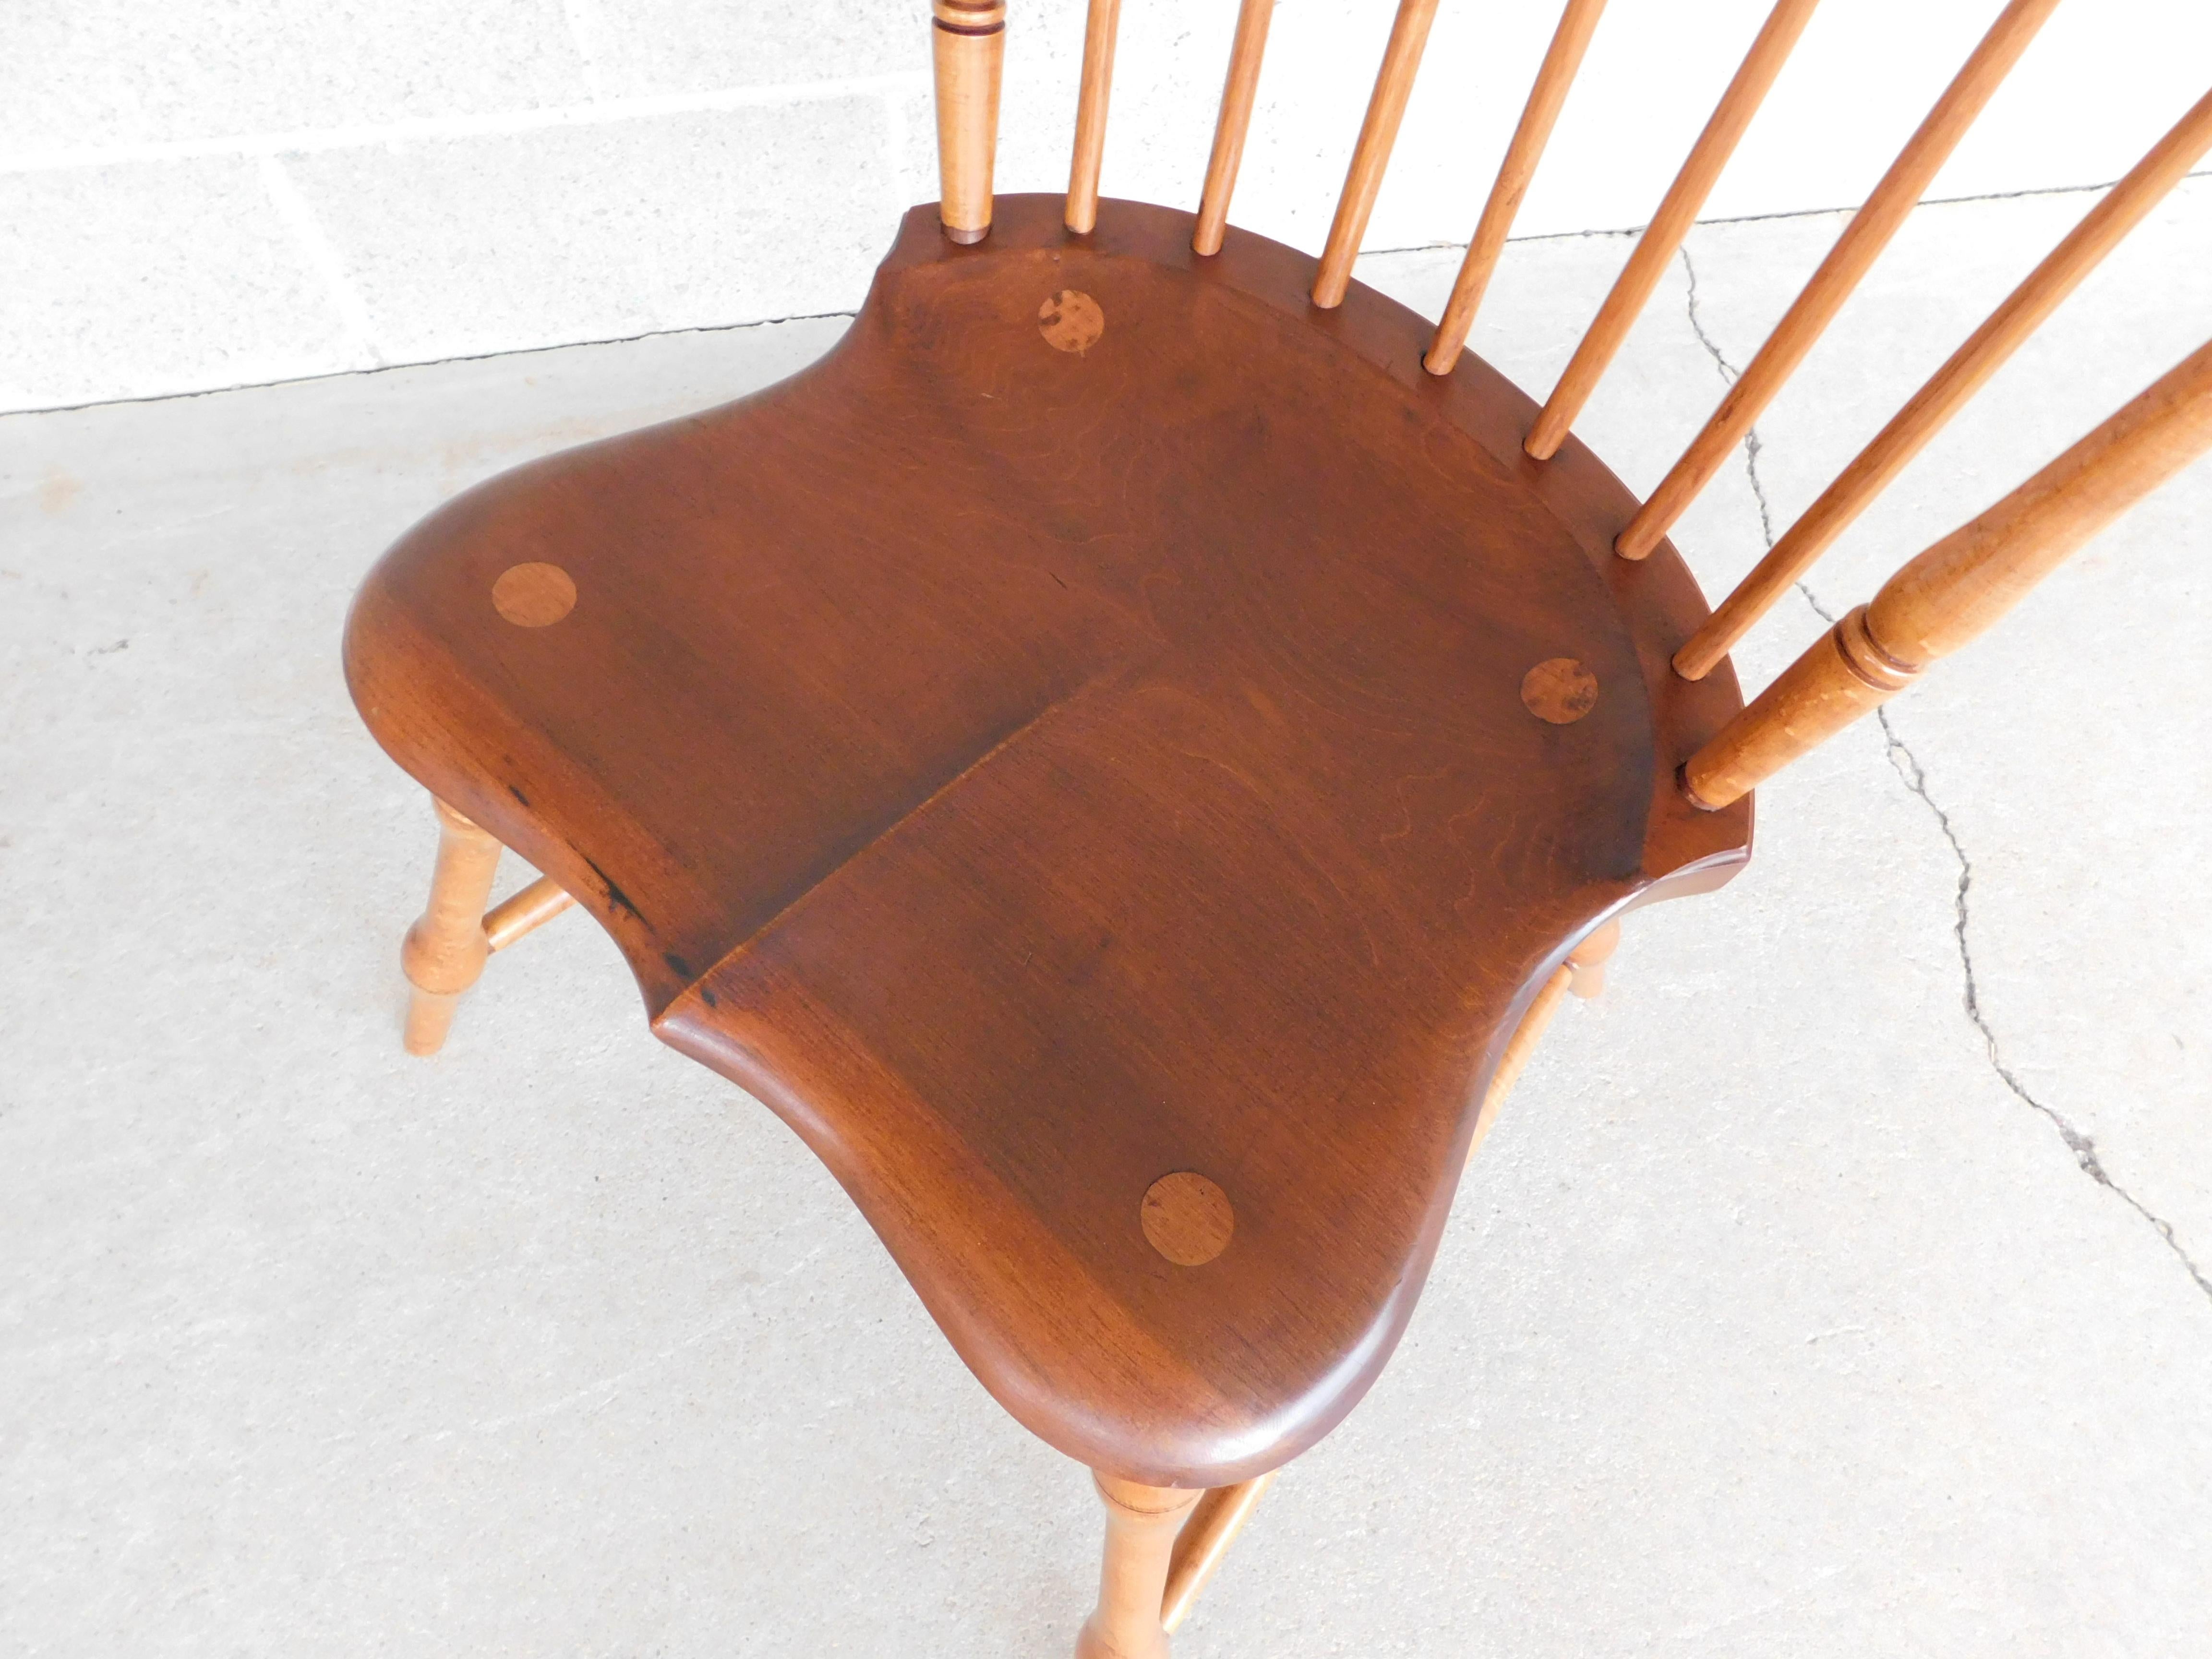 Features fine quality hand made solid hardwoods, beautiful details, appears to have cherry wood seat, tiger maple base/legs stretcher, and oak or ash back, Circa 1952

Very good condition - original finish, one arm chair shows early repair-